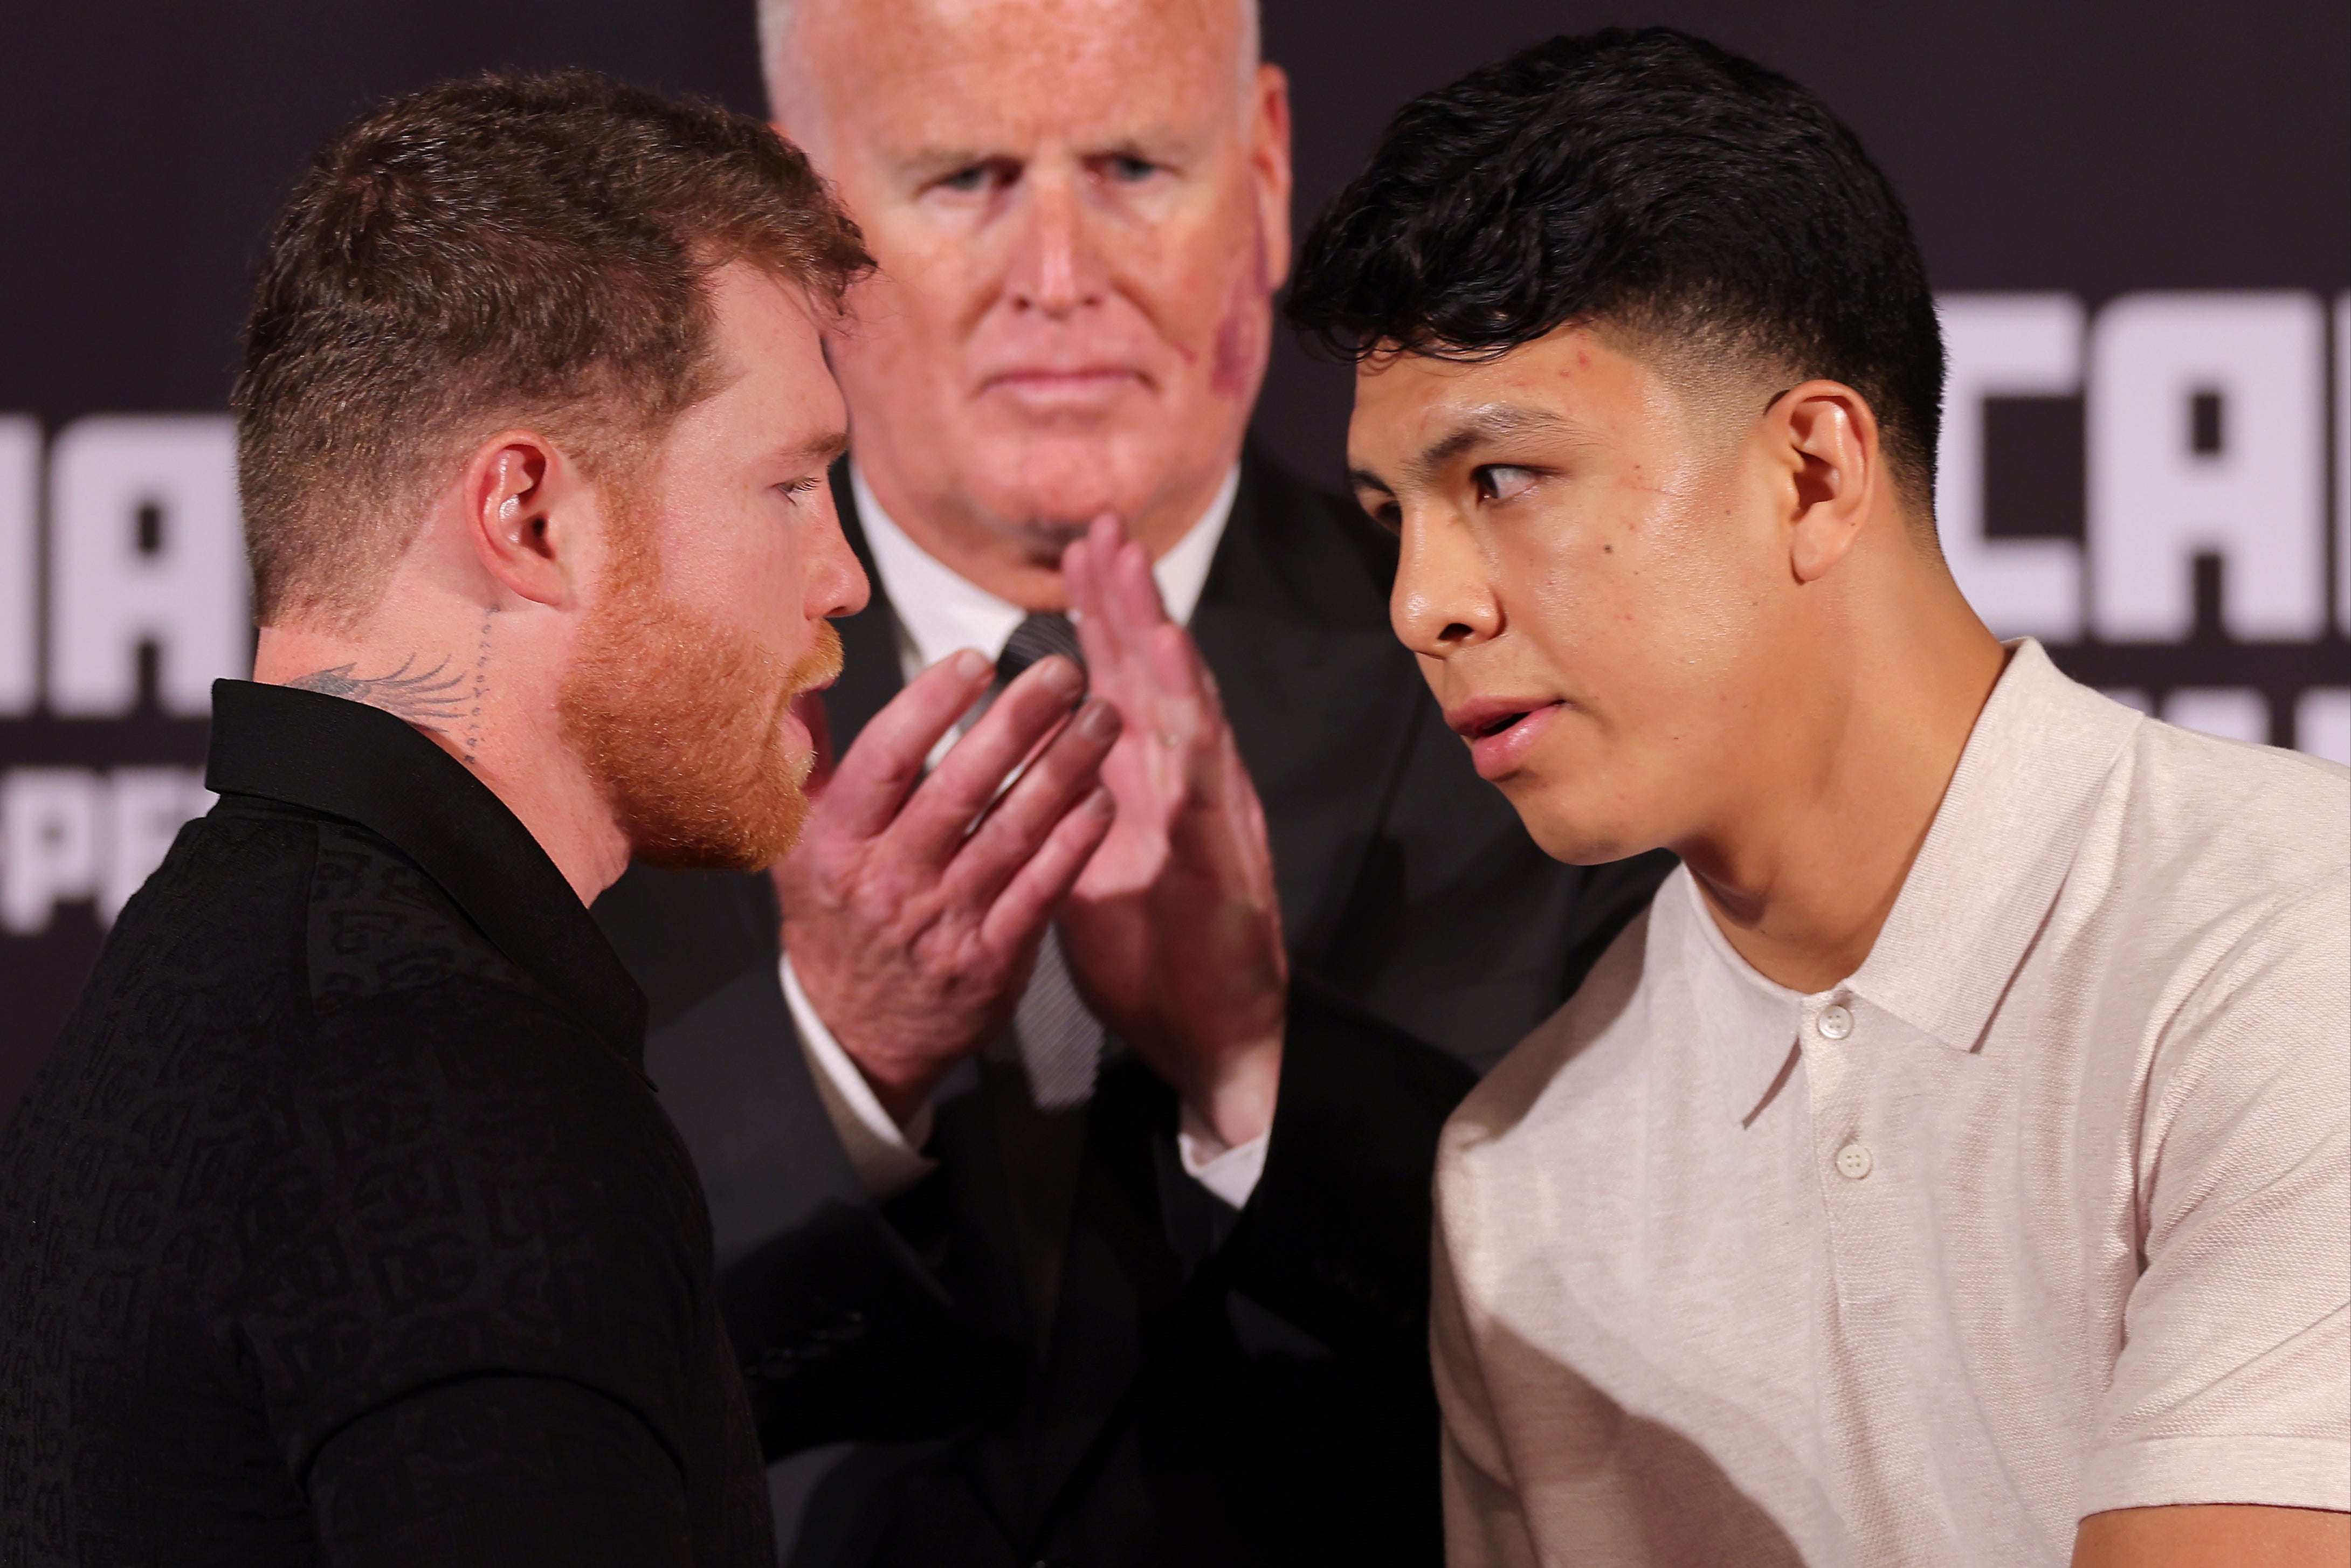 Canelo Alvarez and Jaime Munguia shake hands at a press conference at the Beverly Hills Hotel in March